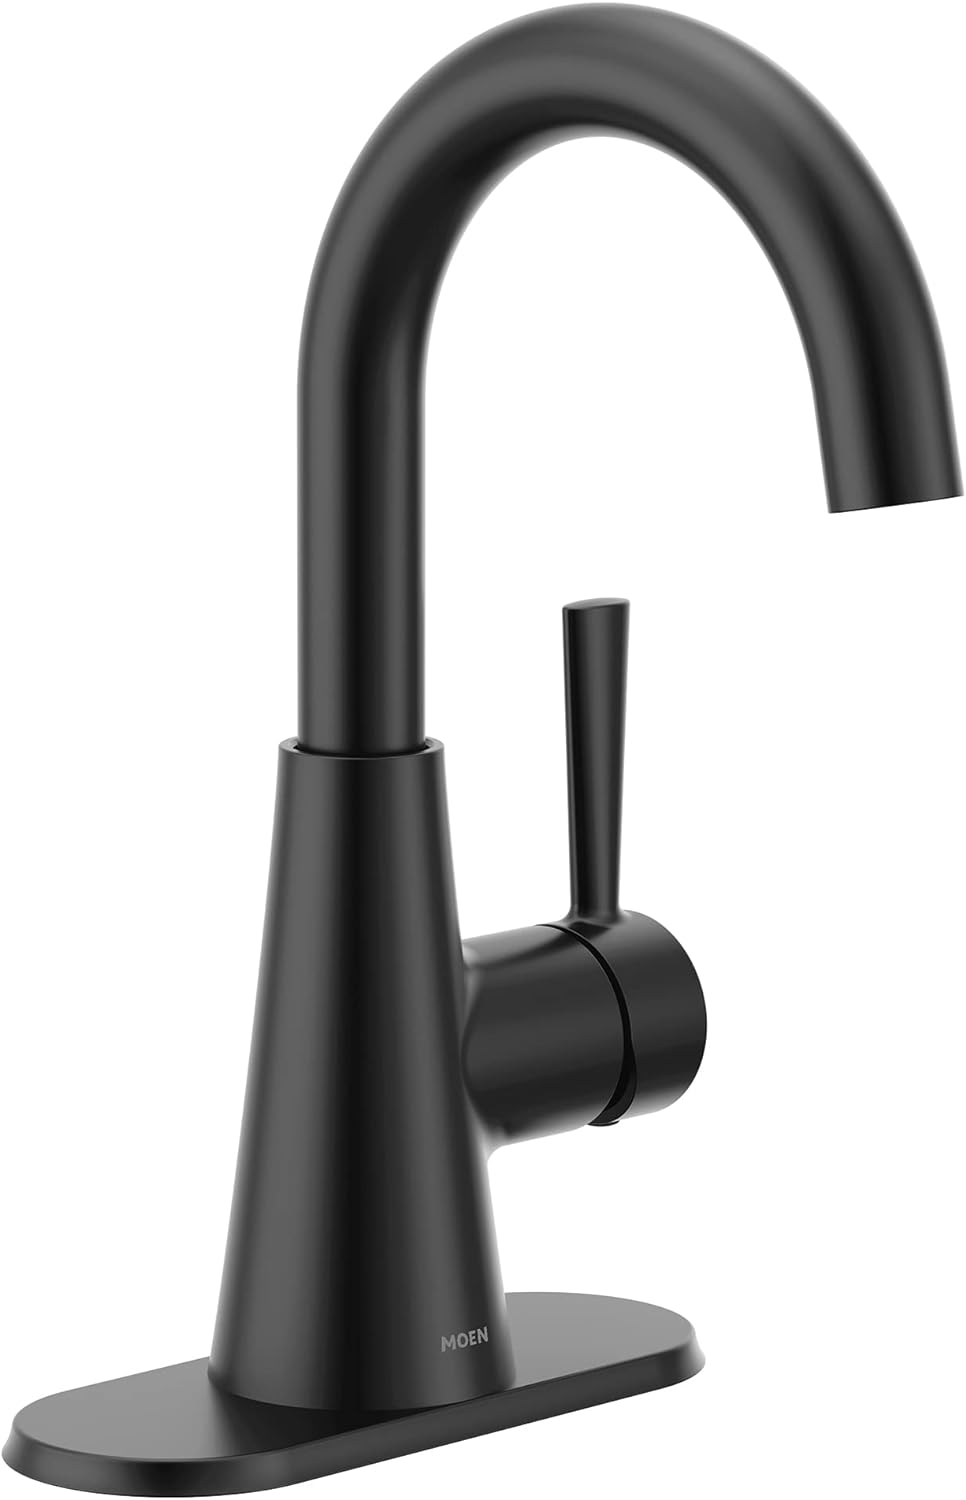 Moen 84021BL Ronan Matte Black Single Hole Modern Bathroom Sink Faucet with Optional Deckplate and Spring Loaded Drain Assembly